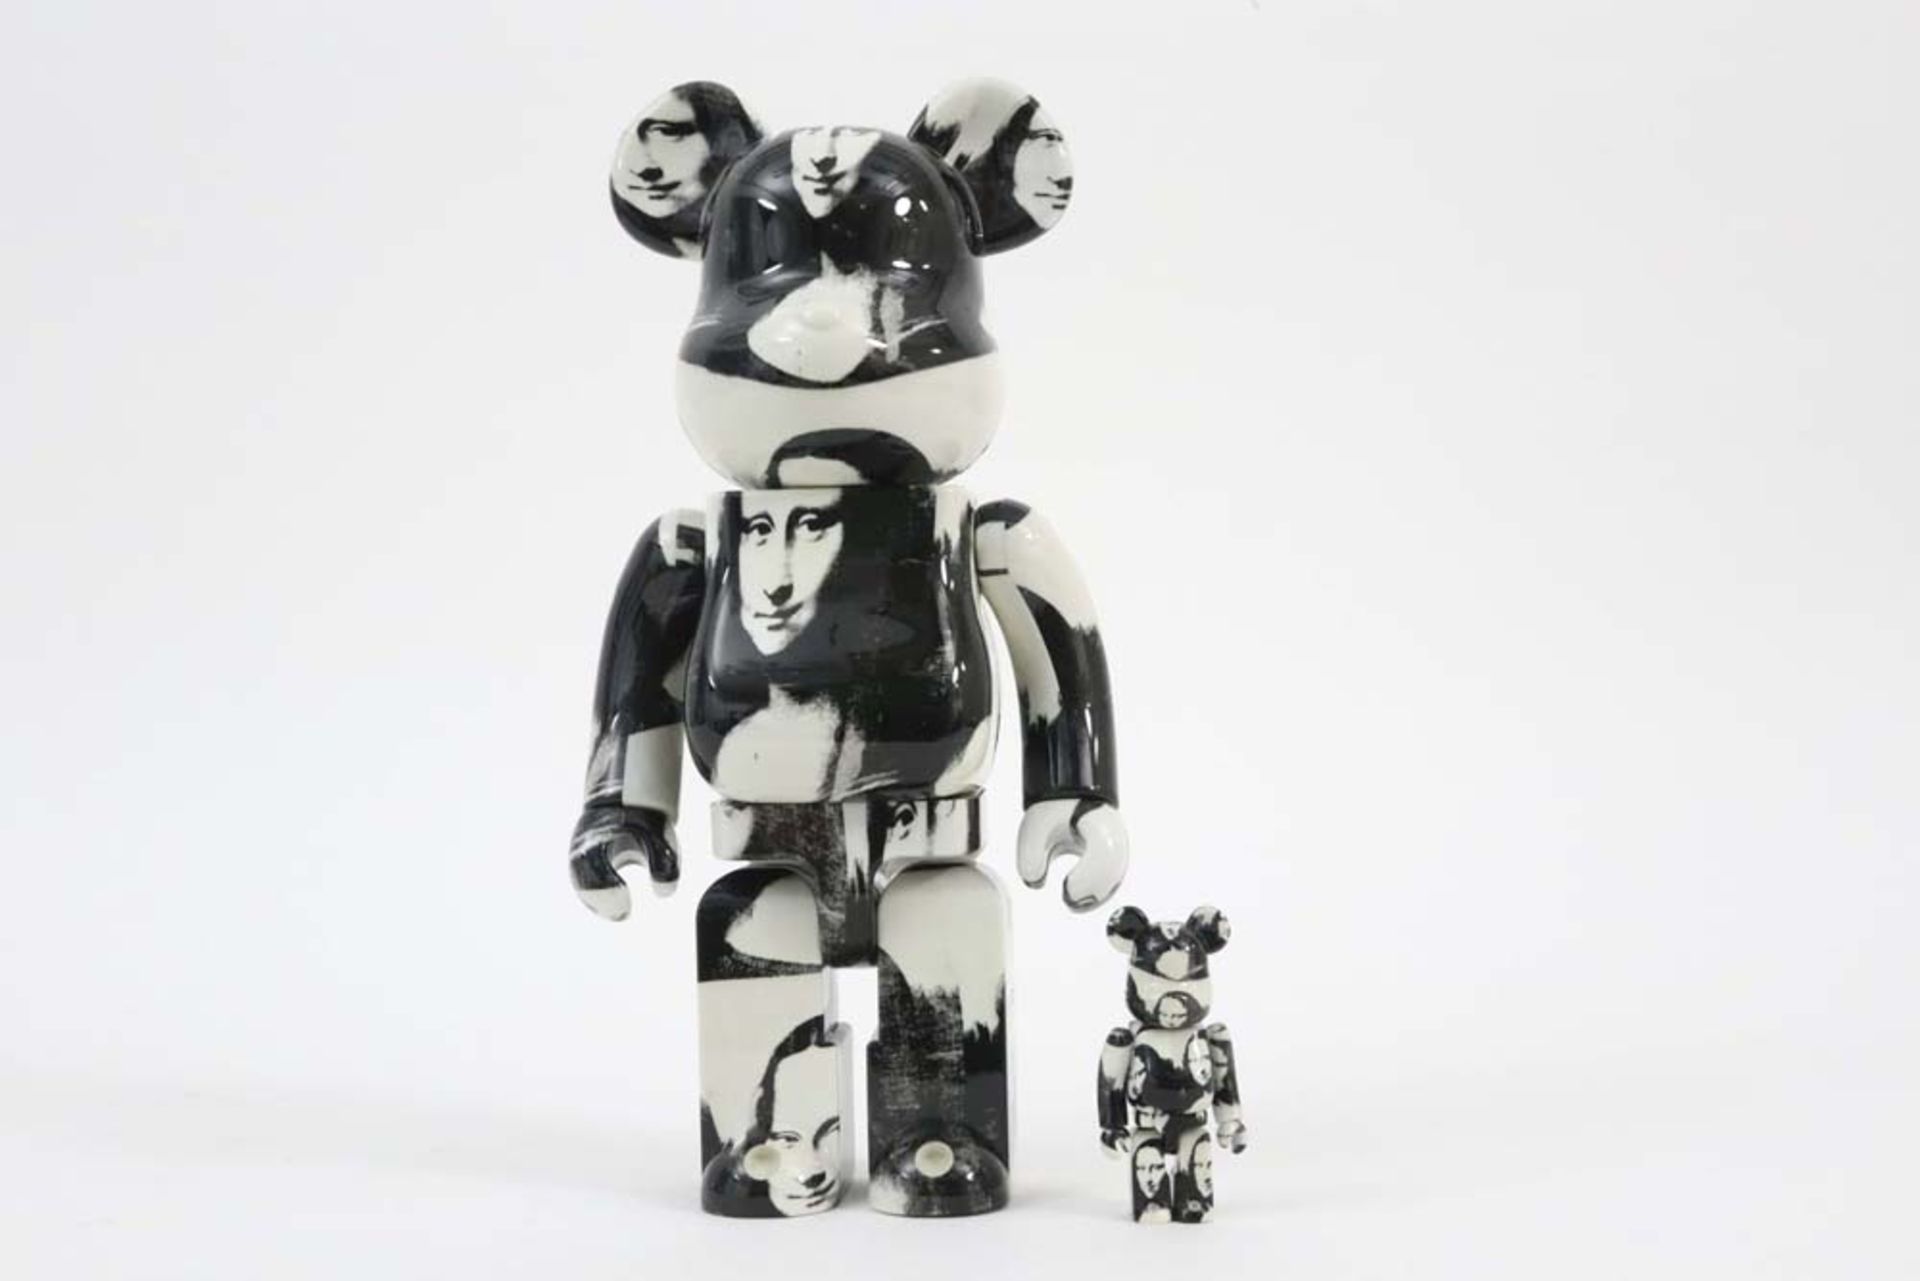 Bearbrick set of small and bigger sculpture after the double Mona Lisa" print by Andy Warhol - - Image 2 of 6